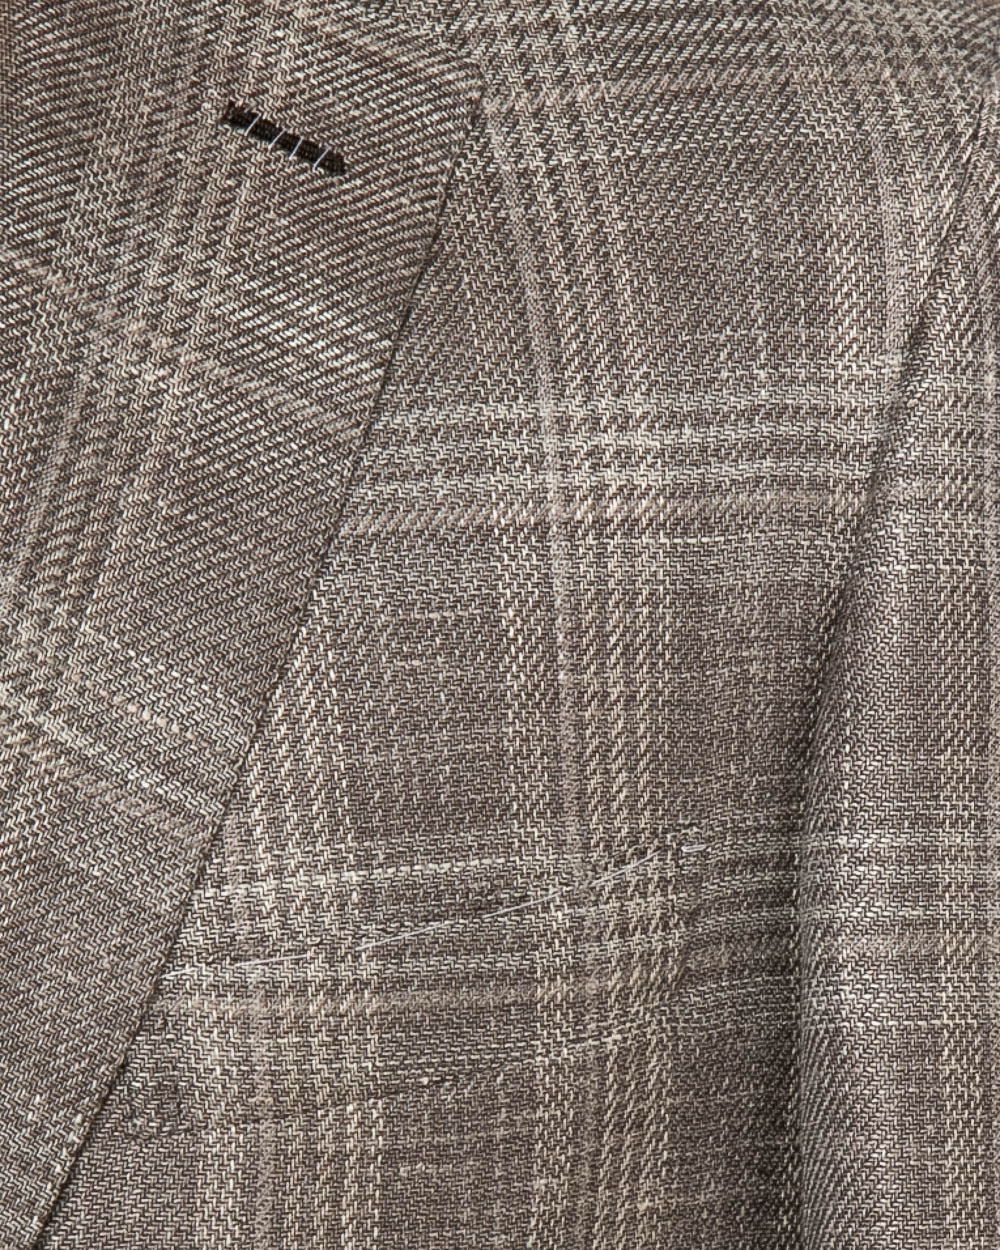 Taupe Glen Plaid Sportcoat